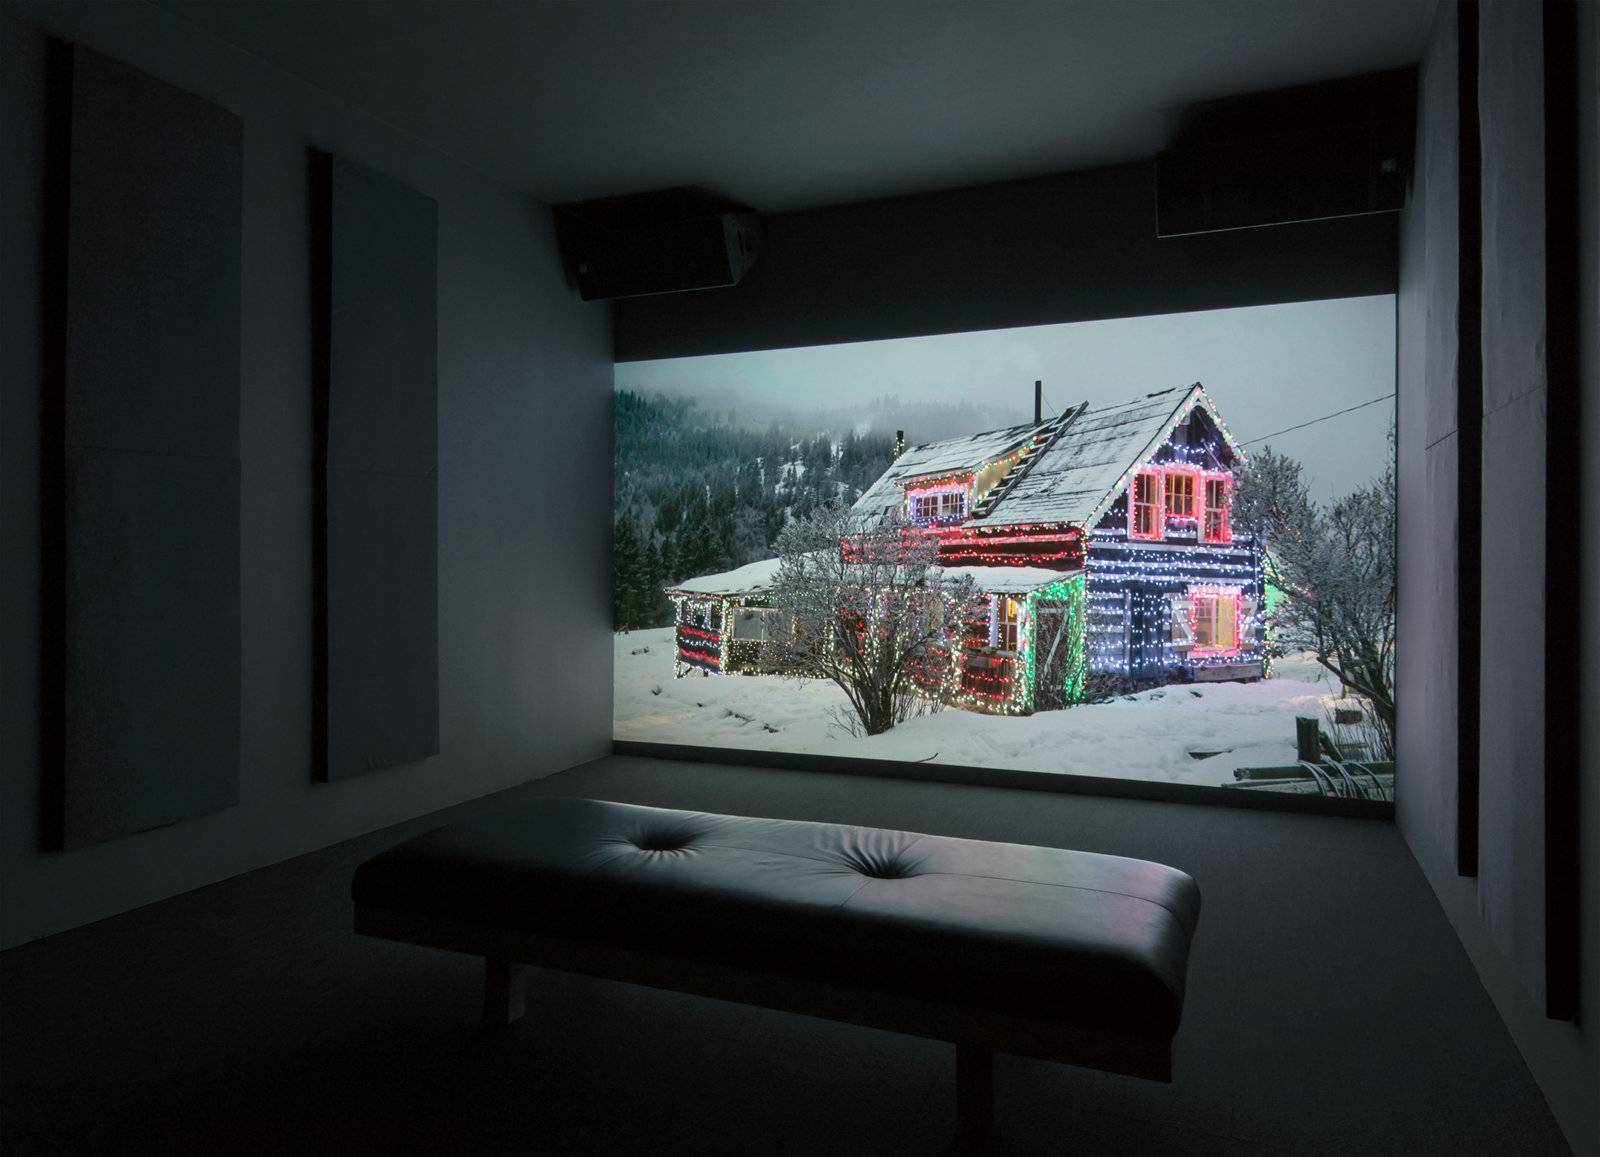 Kevin Schmidt, EDM House, 2014, HD video, 16 minutes, 54 seconds. Installation view, The Commons, Kamloops Art Gallery, Kamloops, Canada, 2015